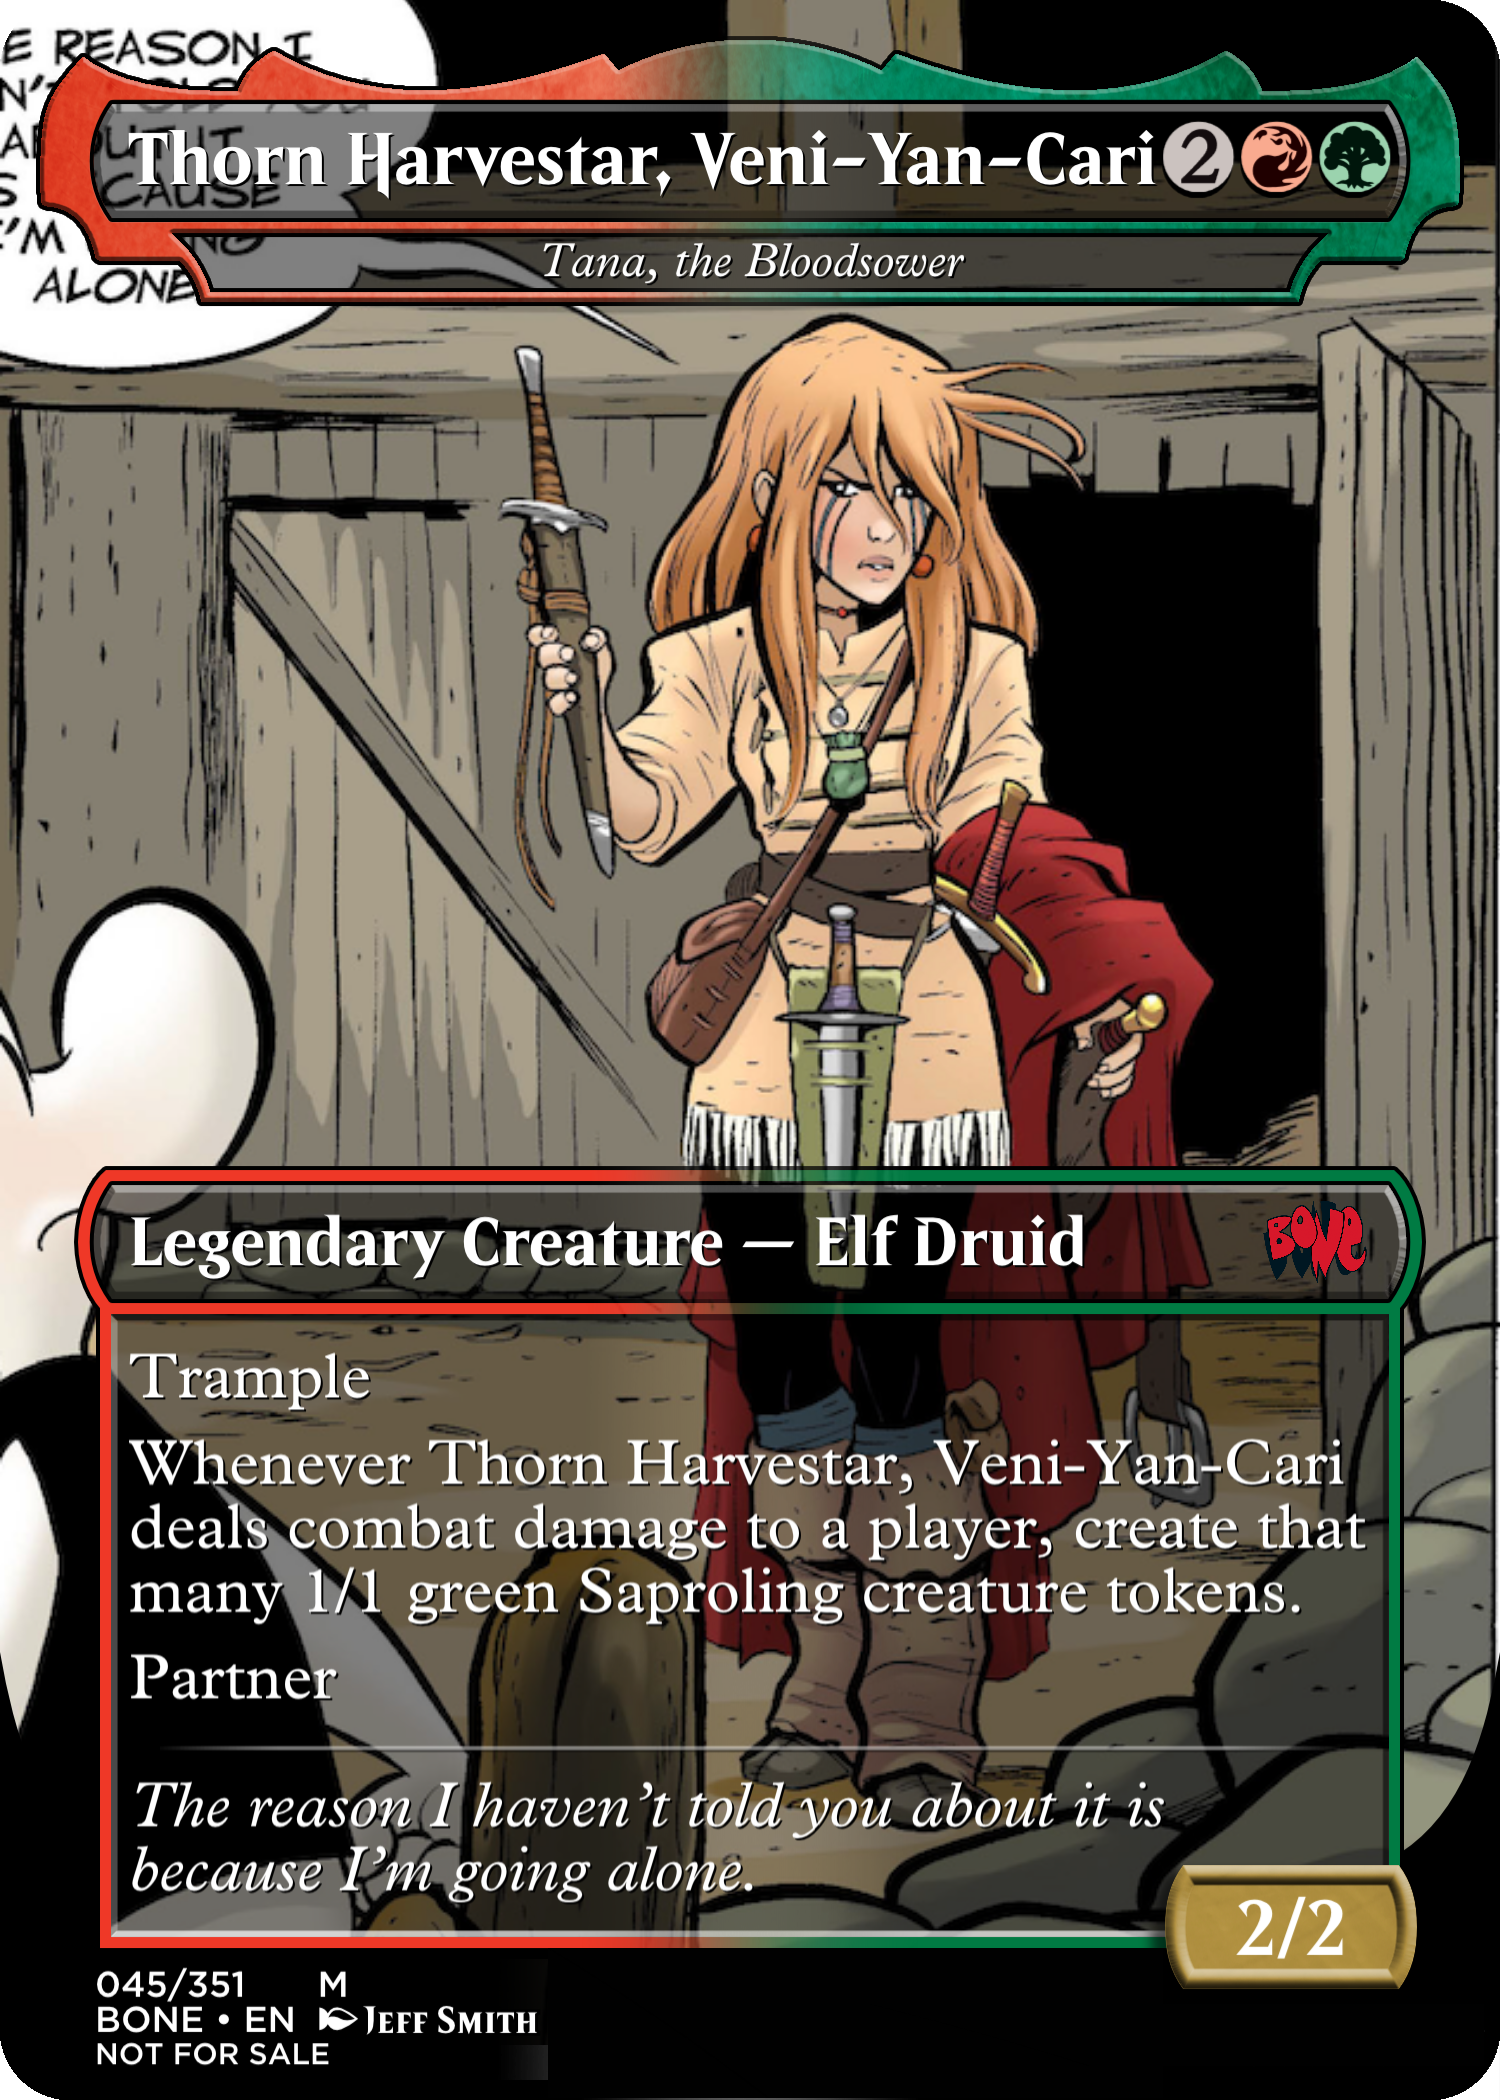 Featured card: Tana, the Bloodsower